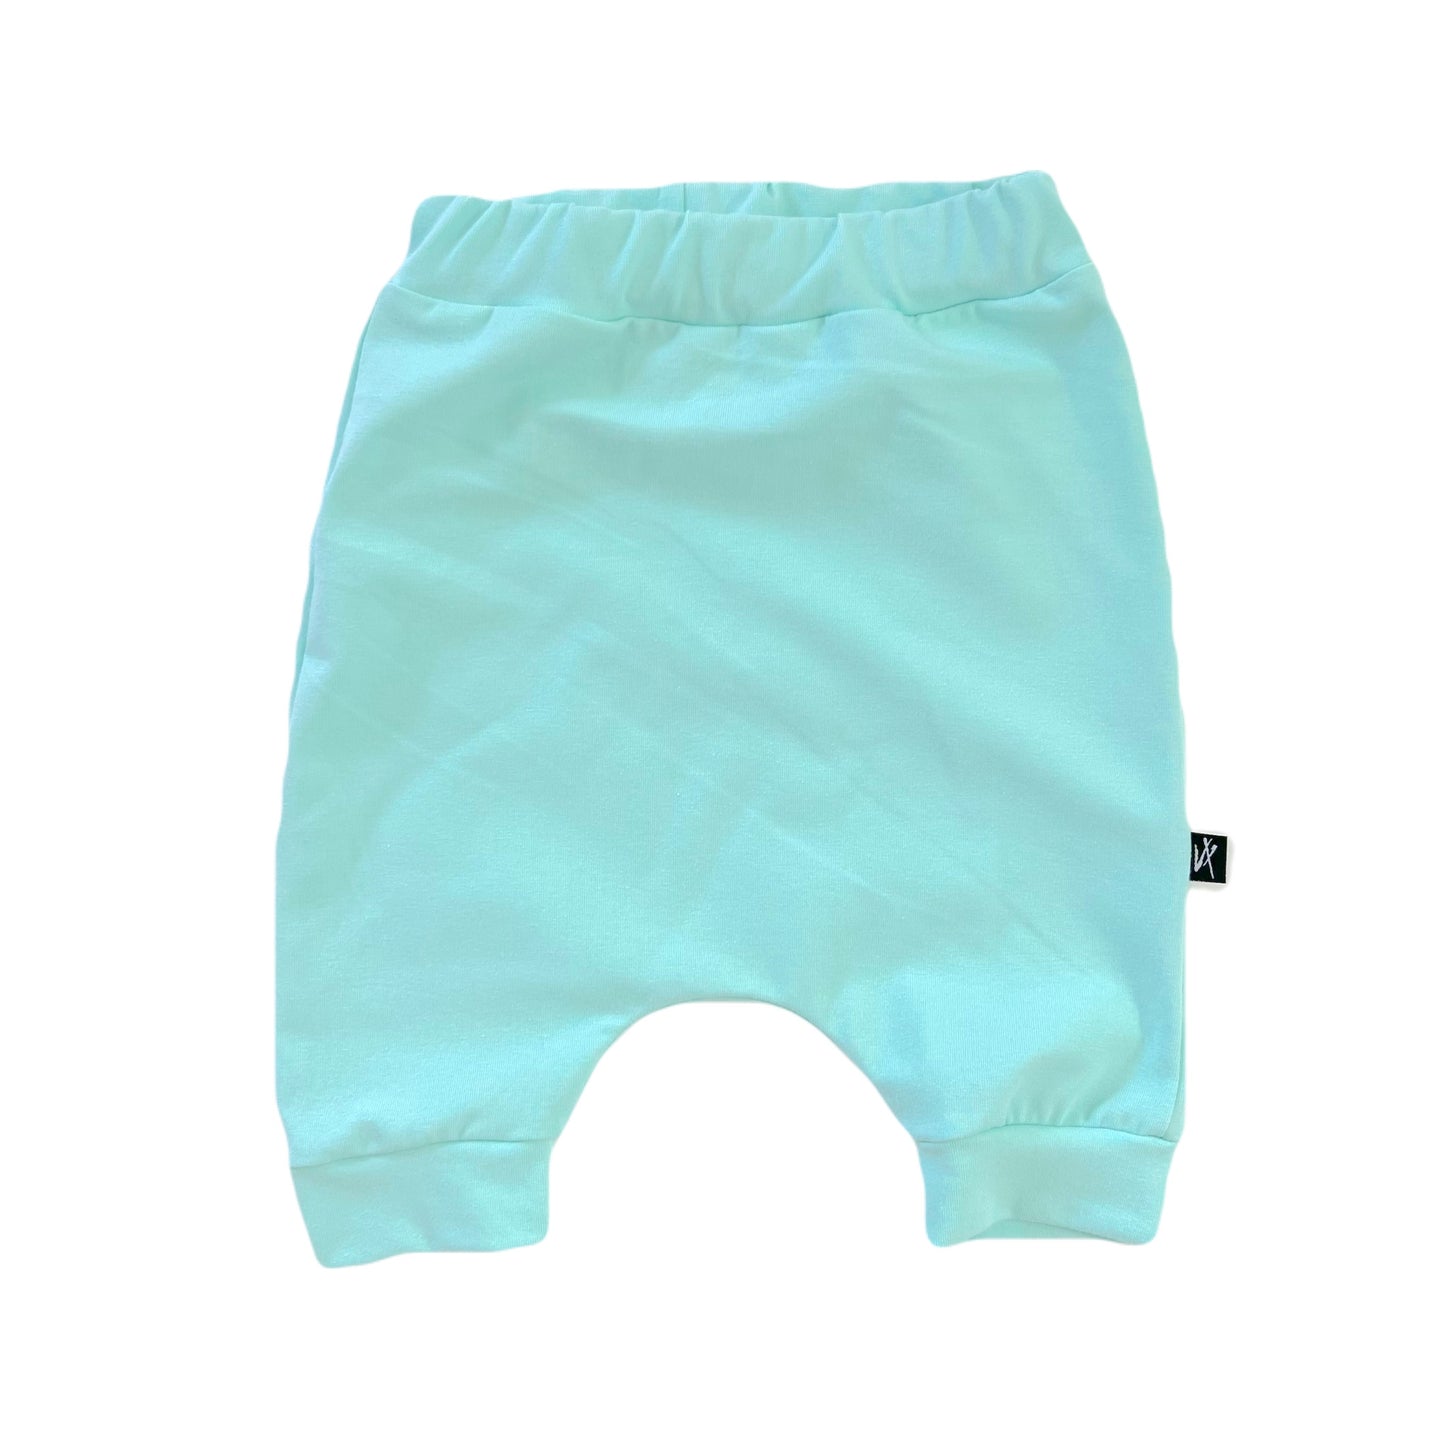 Solid Shorts - 4 color options